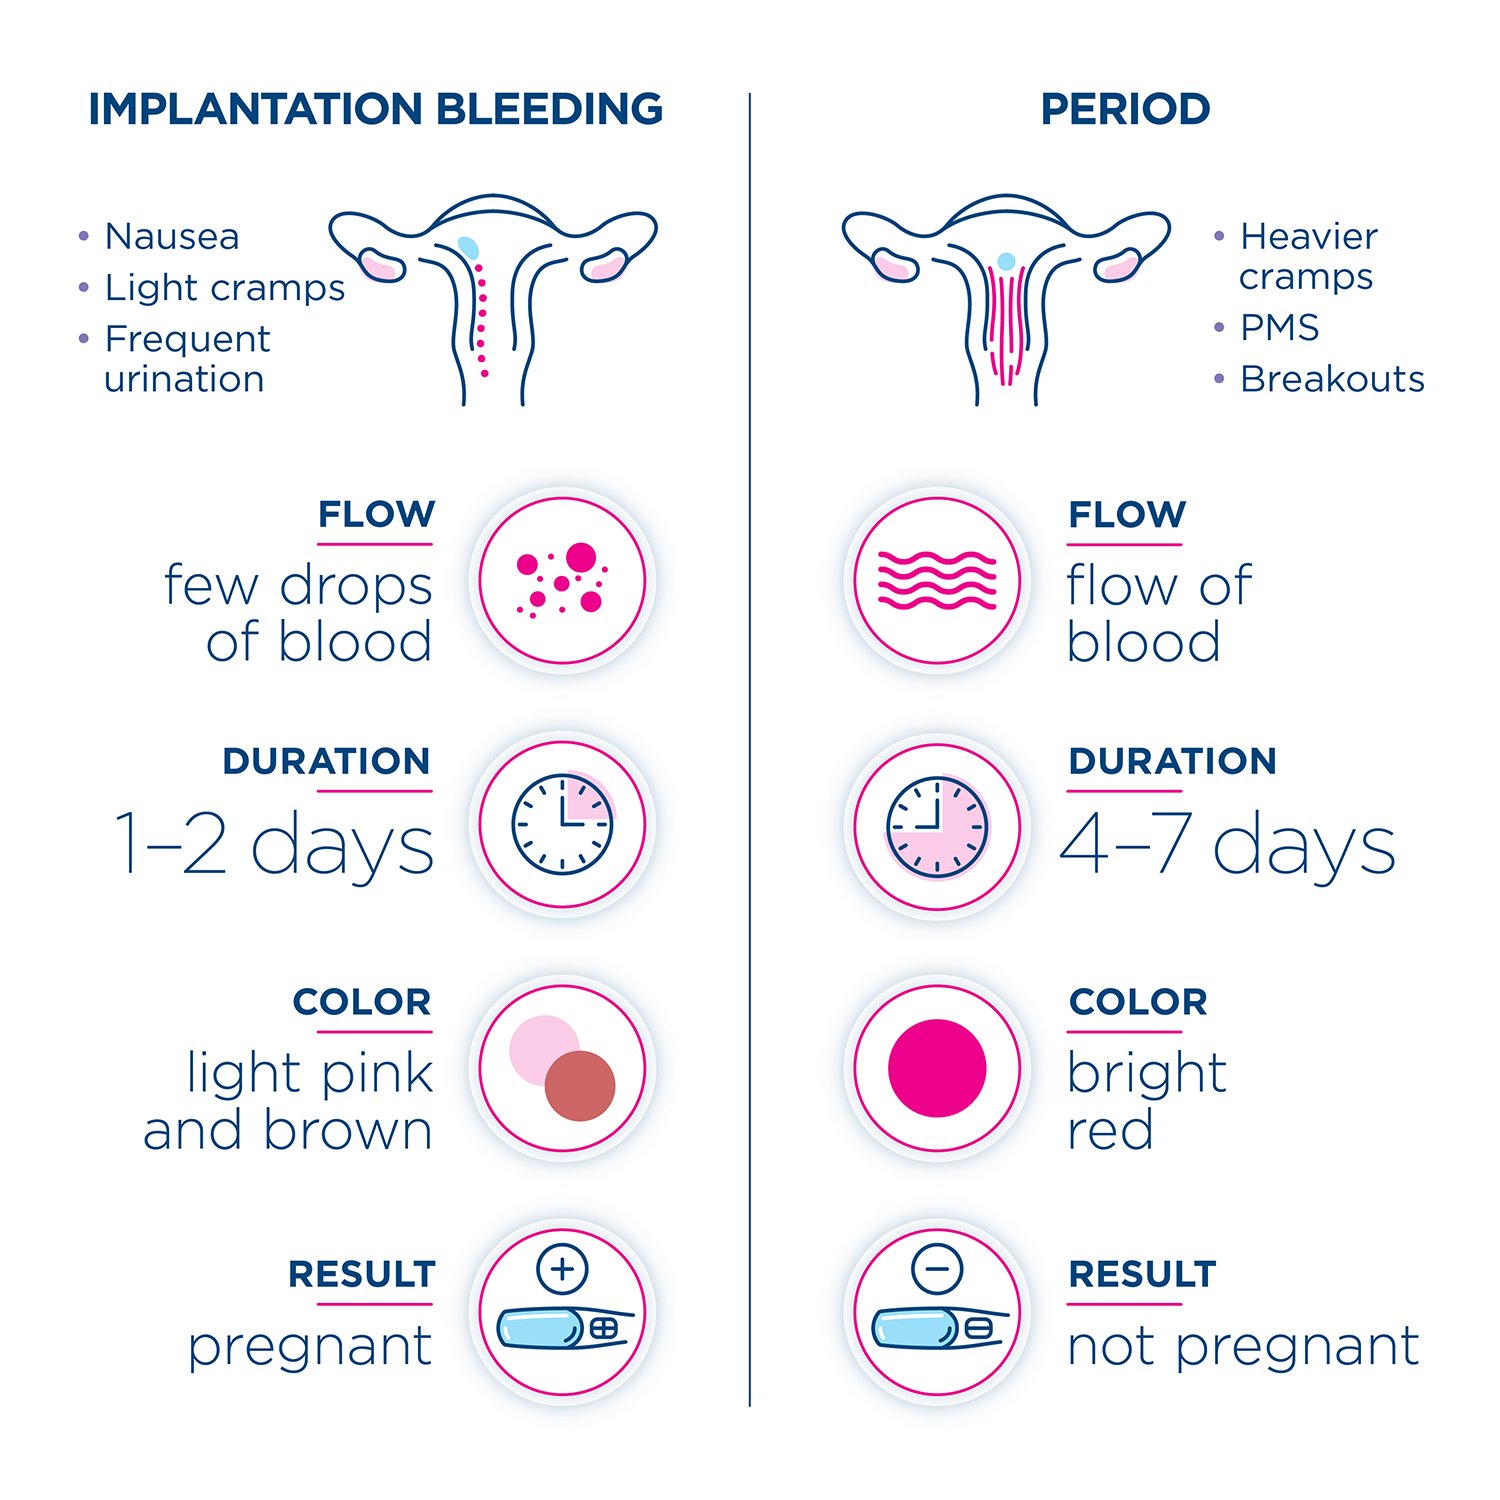 All you need to know about implantation bleeding